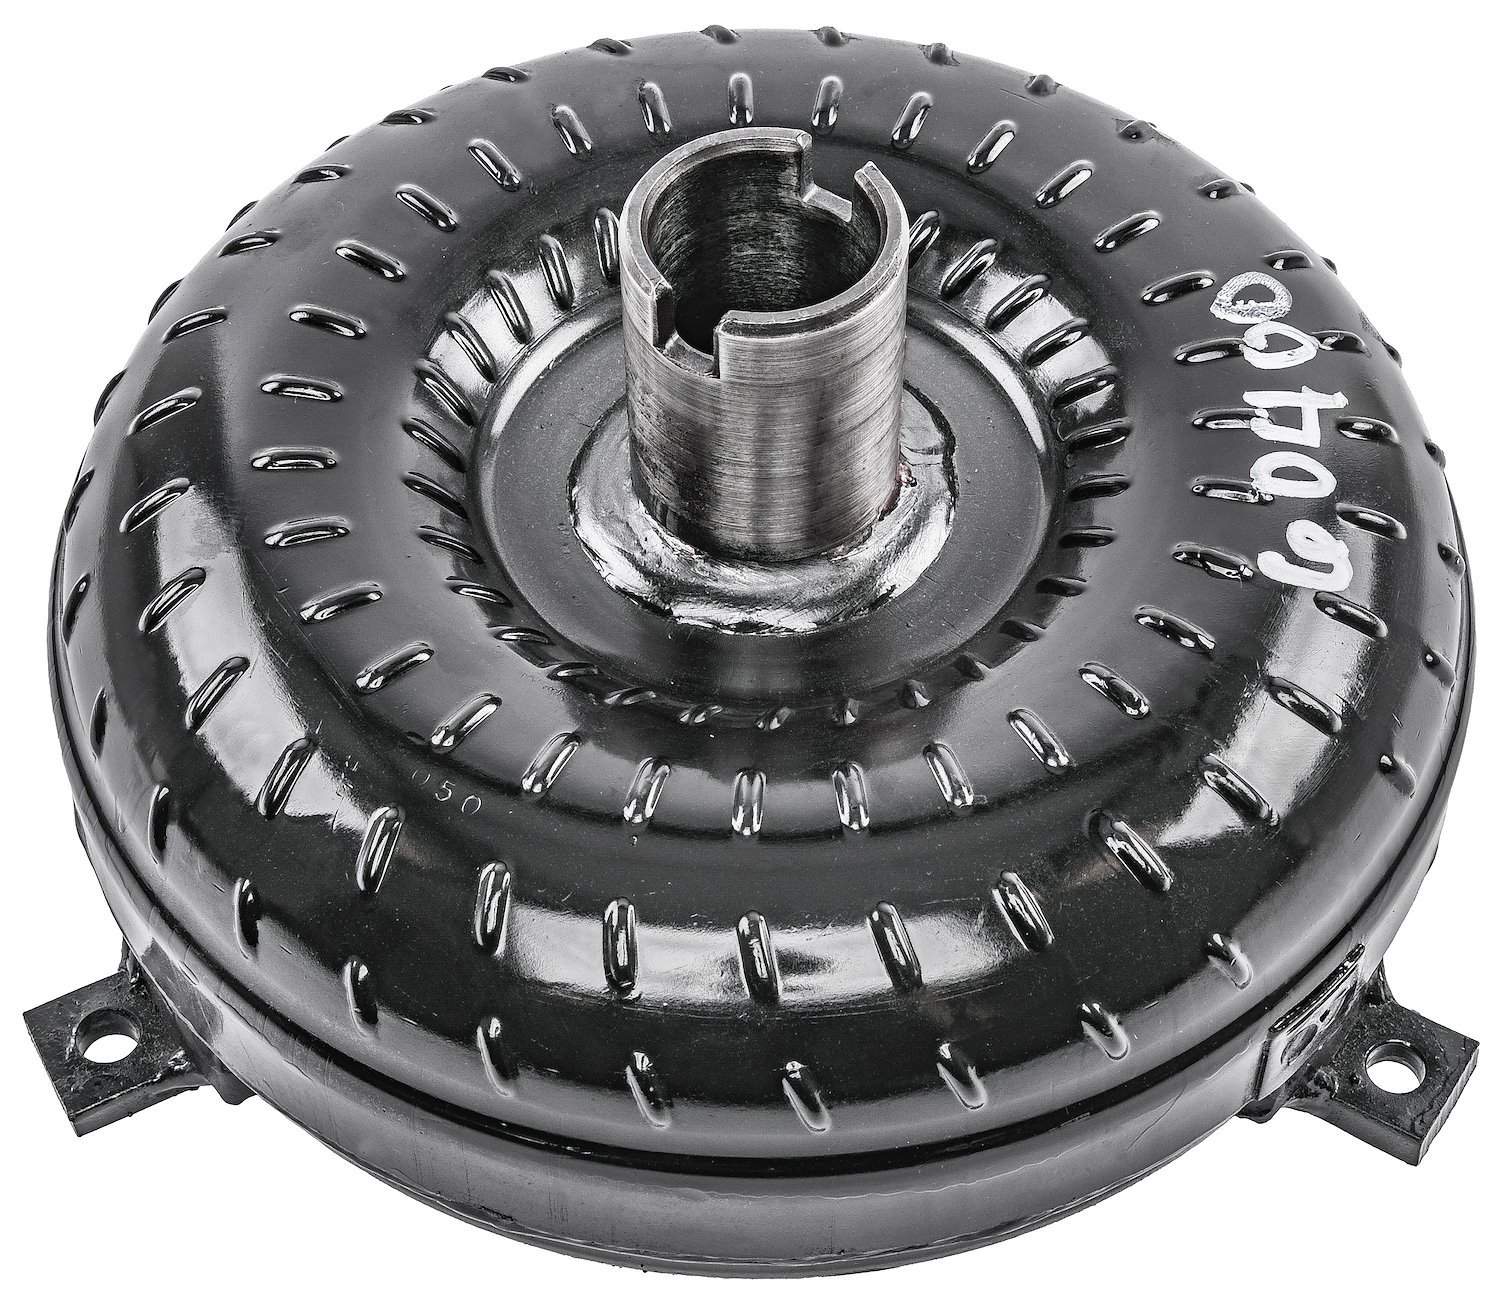 Torque Converter for GM TH350/TH400